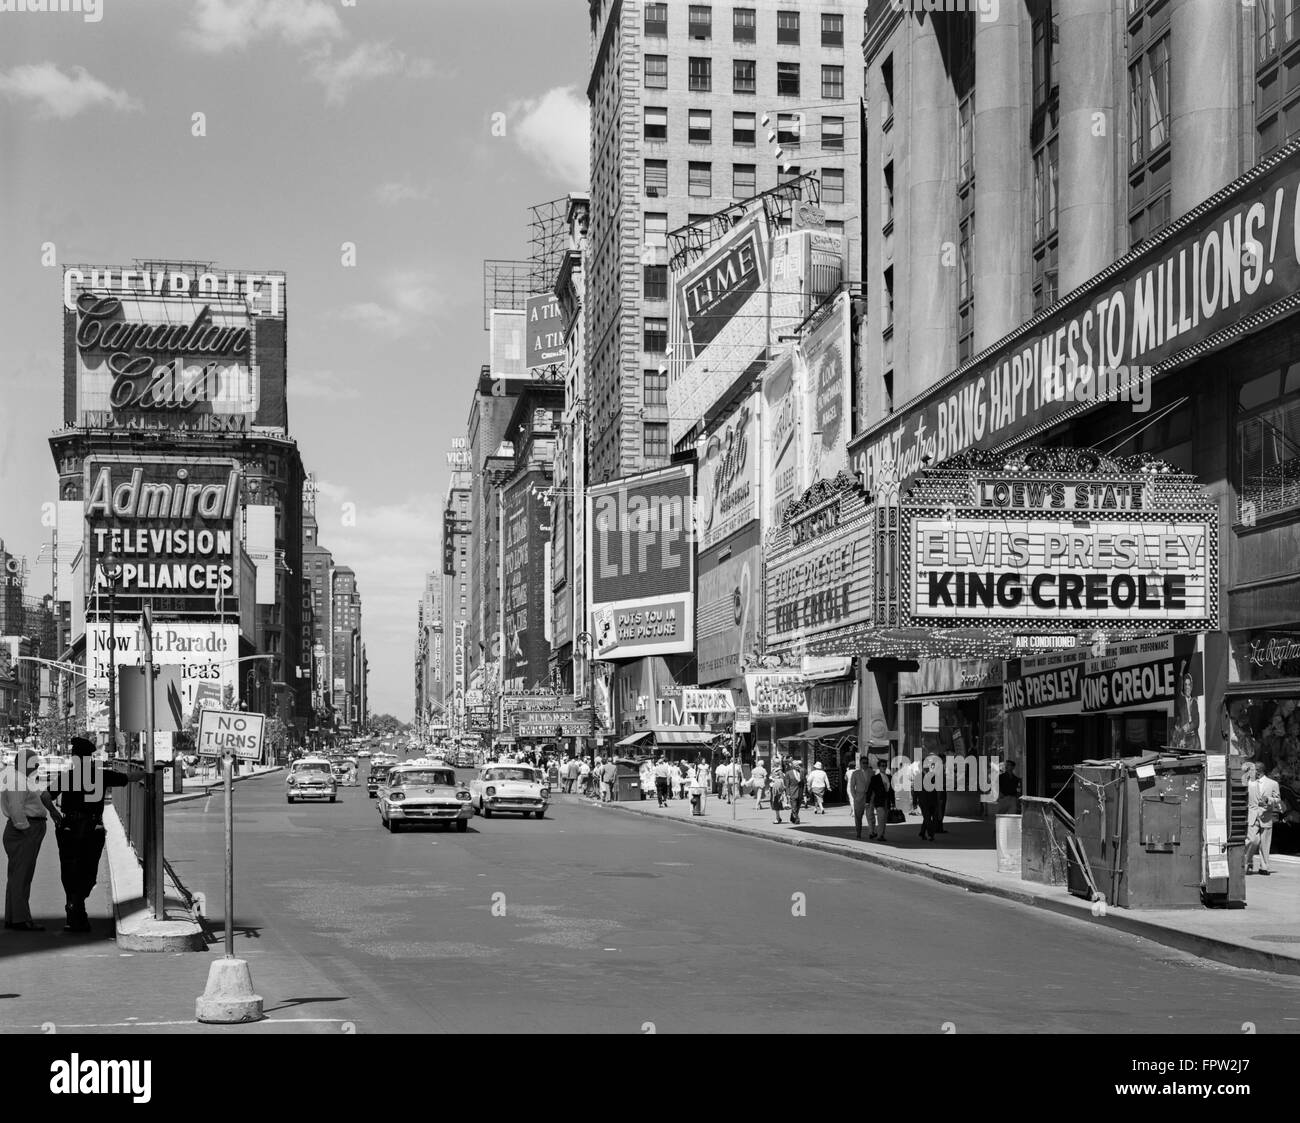 1950s TIMES SQUARE VIEW NORTH UP 7TH AVE AT 45TH ST KING CREOLE STARRING ELVIS PRESLEY ON LOWES STATE THEATRE MARQUEE NYC USA Stock Photo